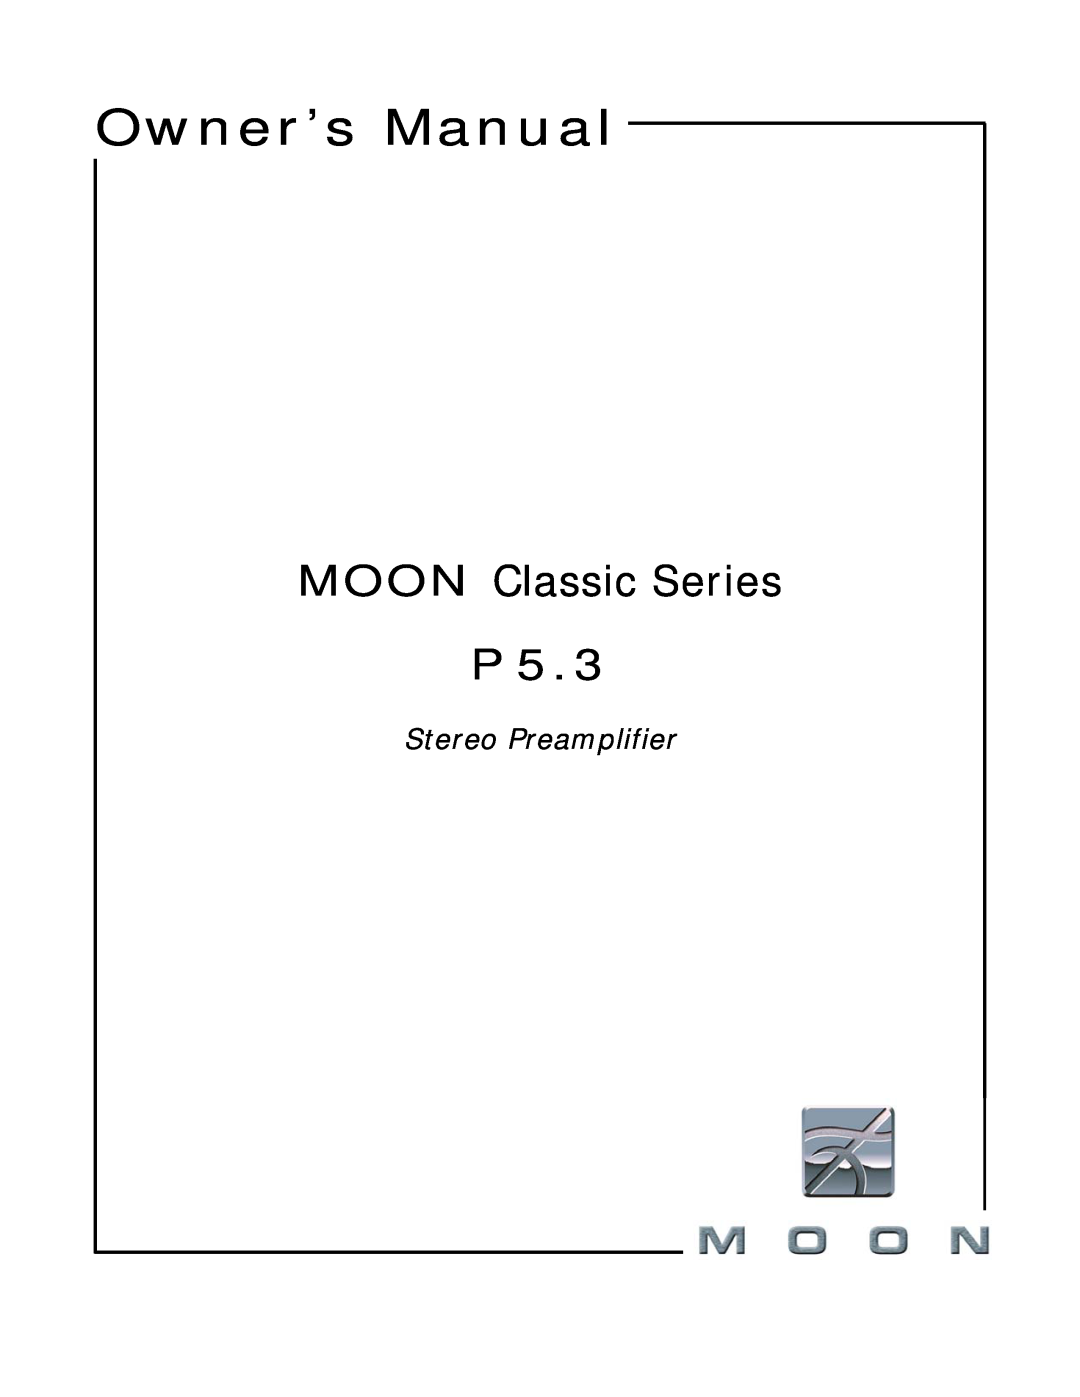 Simaudio P 5.3 owner manual MOON Classic Series P, Stereo Preamplifier 